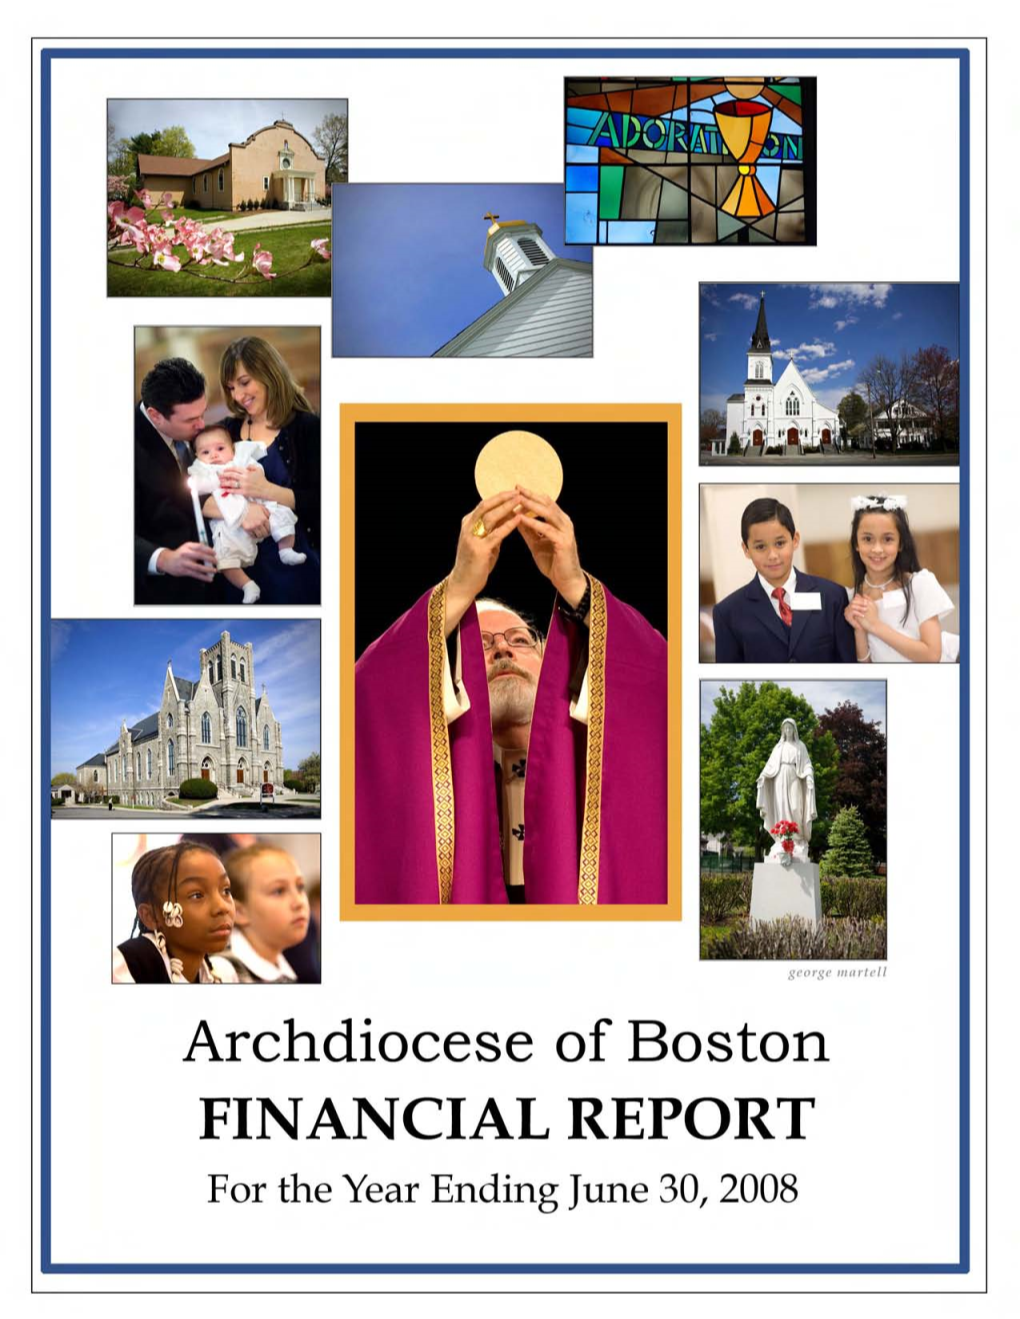 The Roman Catholic Archbishop of Boston, a Corporation Sole 32 Financial Statements, Supplemental Schedules and Report of Independent Certified Public Accountants